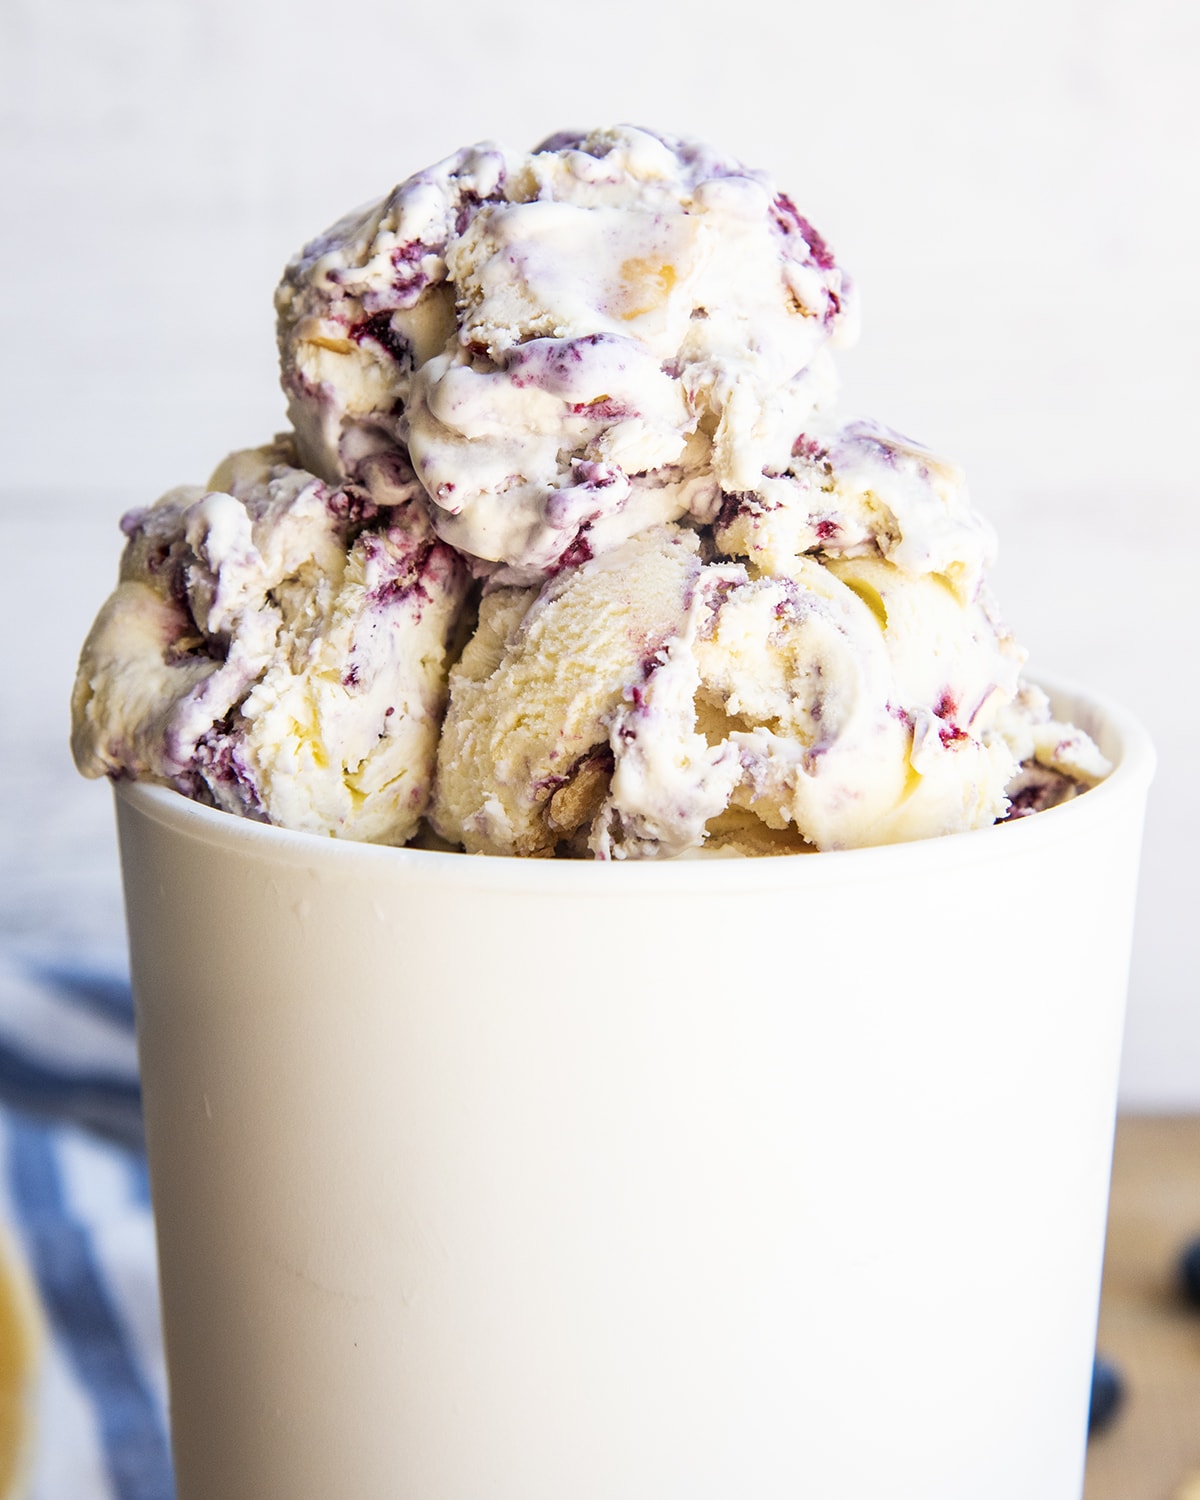 A white ice cream container with three scoops of blueberry swirled ice cream on top.